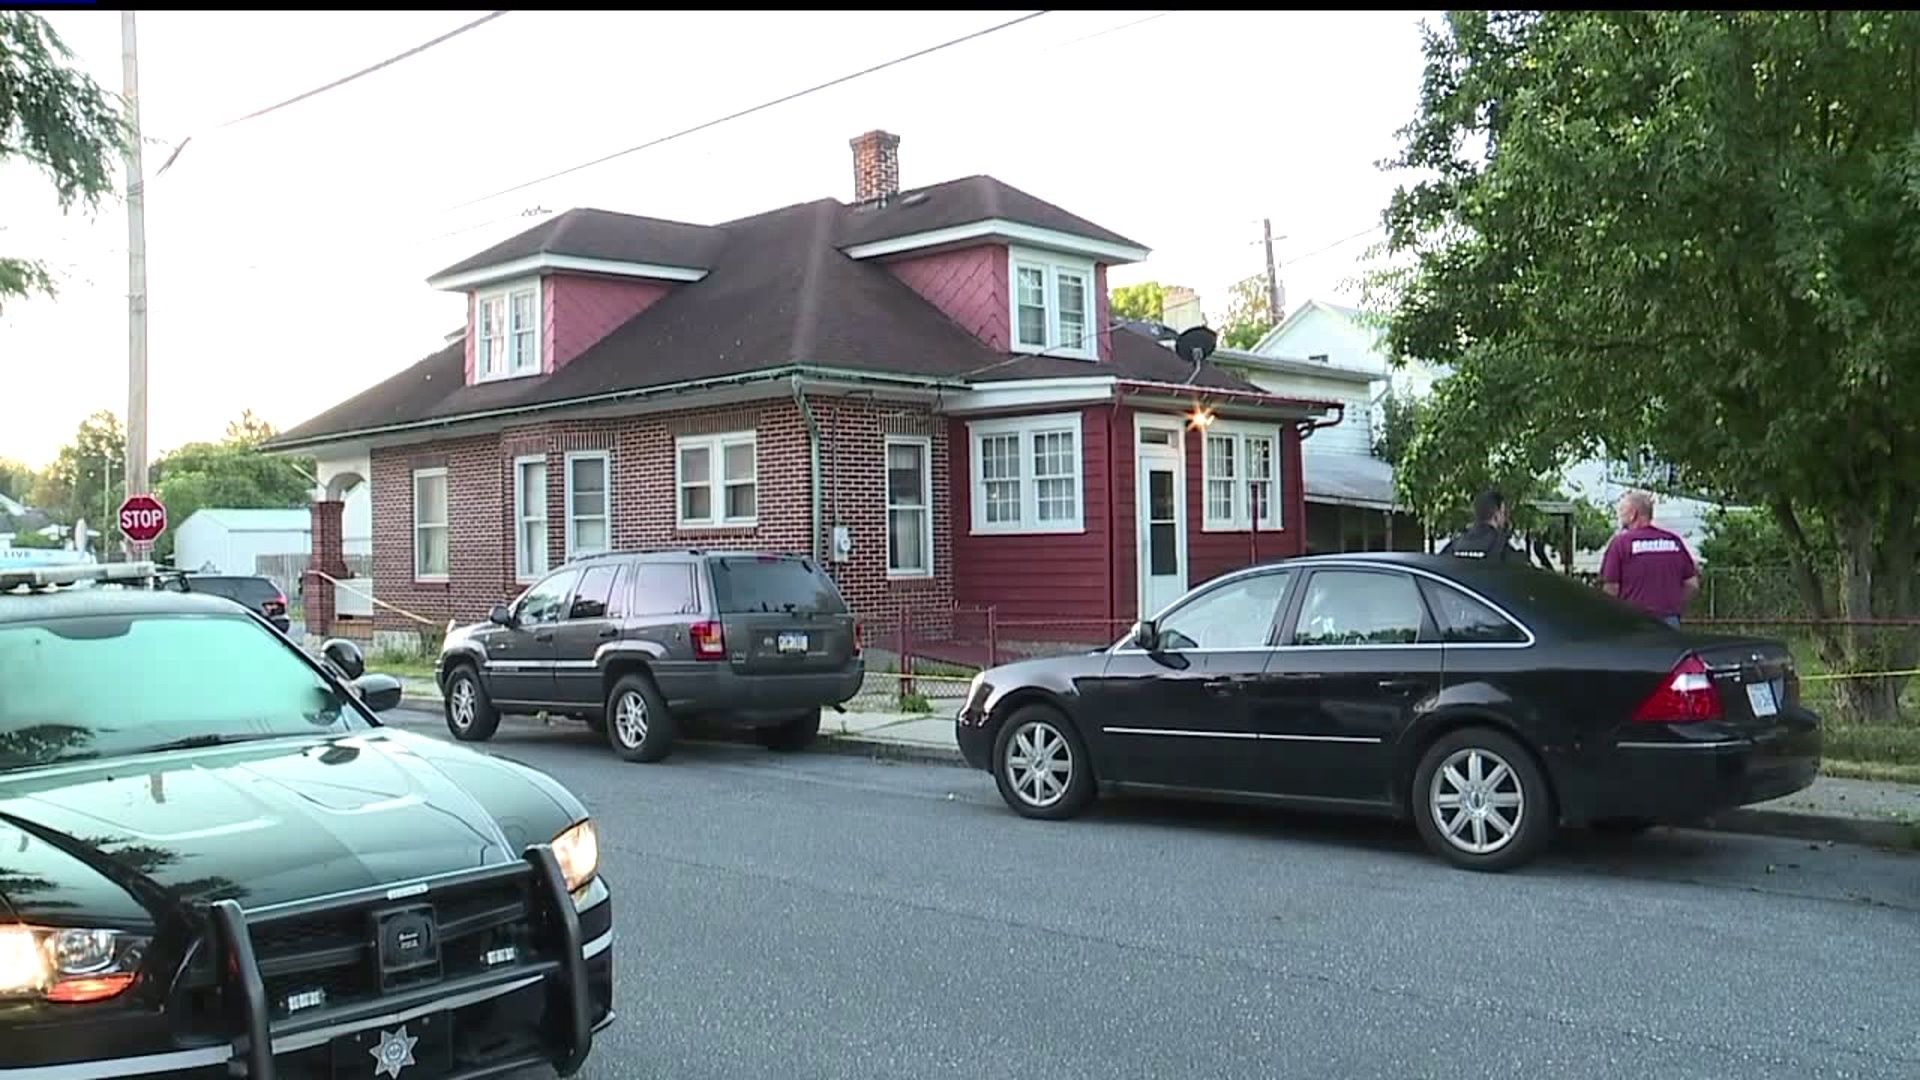 No one injured after home invasion in Hummelstown